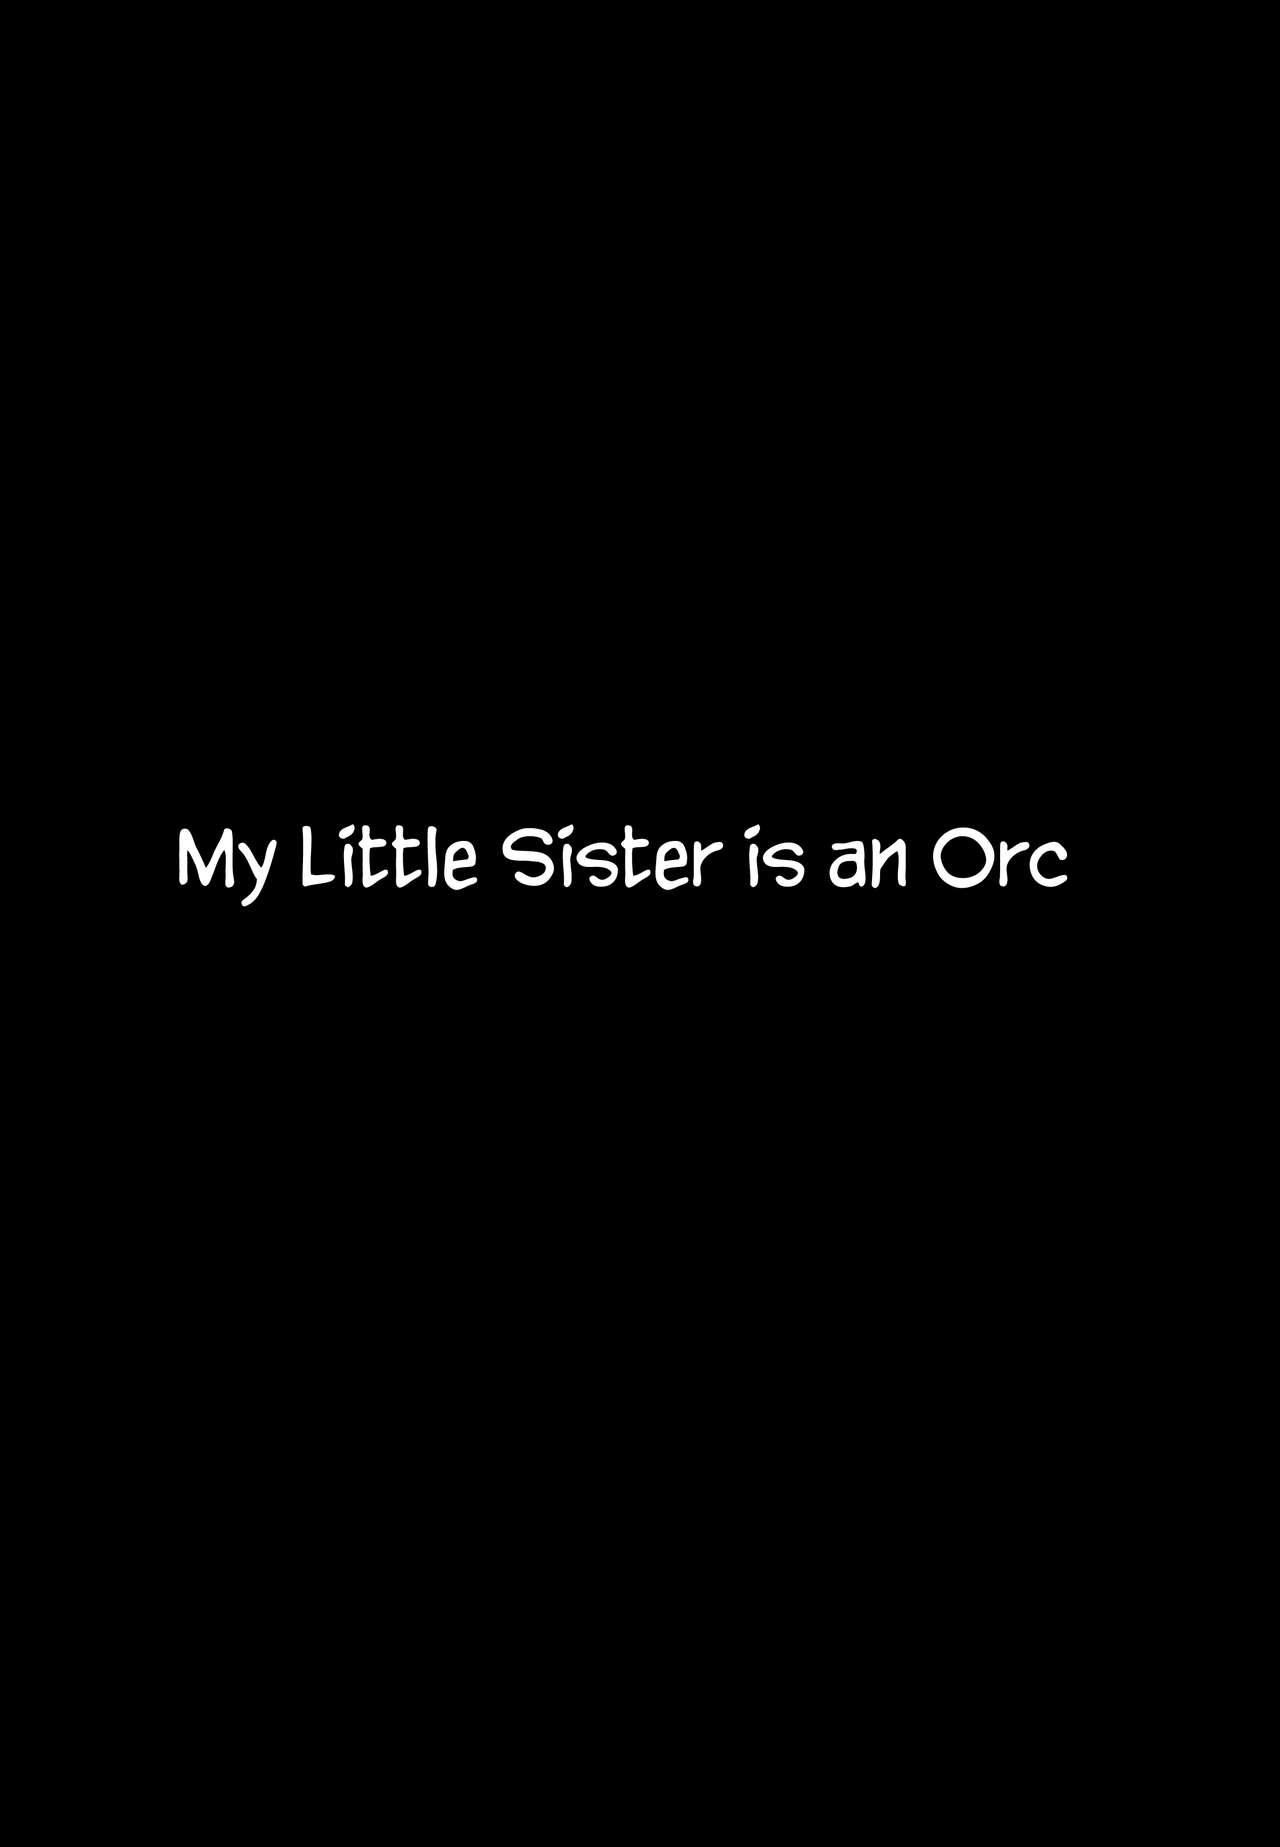 Imouto wa Mesu Orc | My Little Sister is an Orc 1